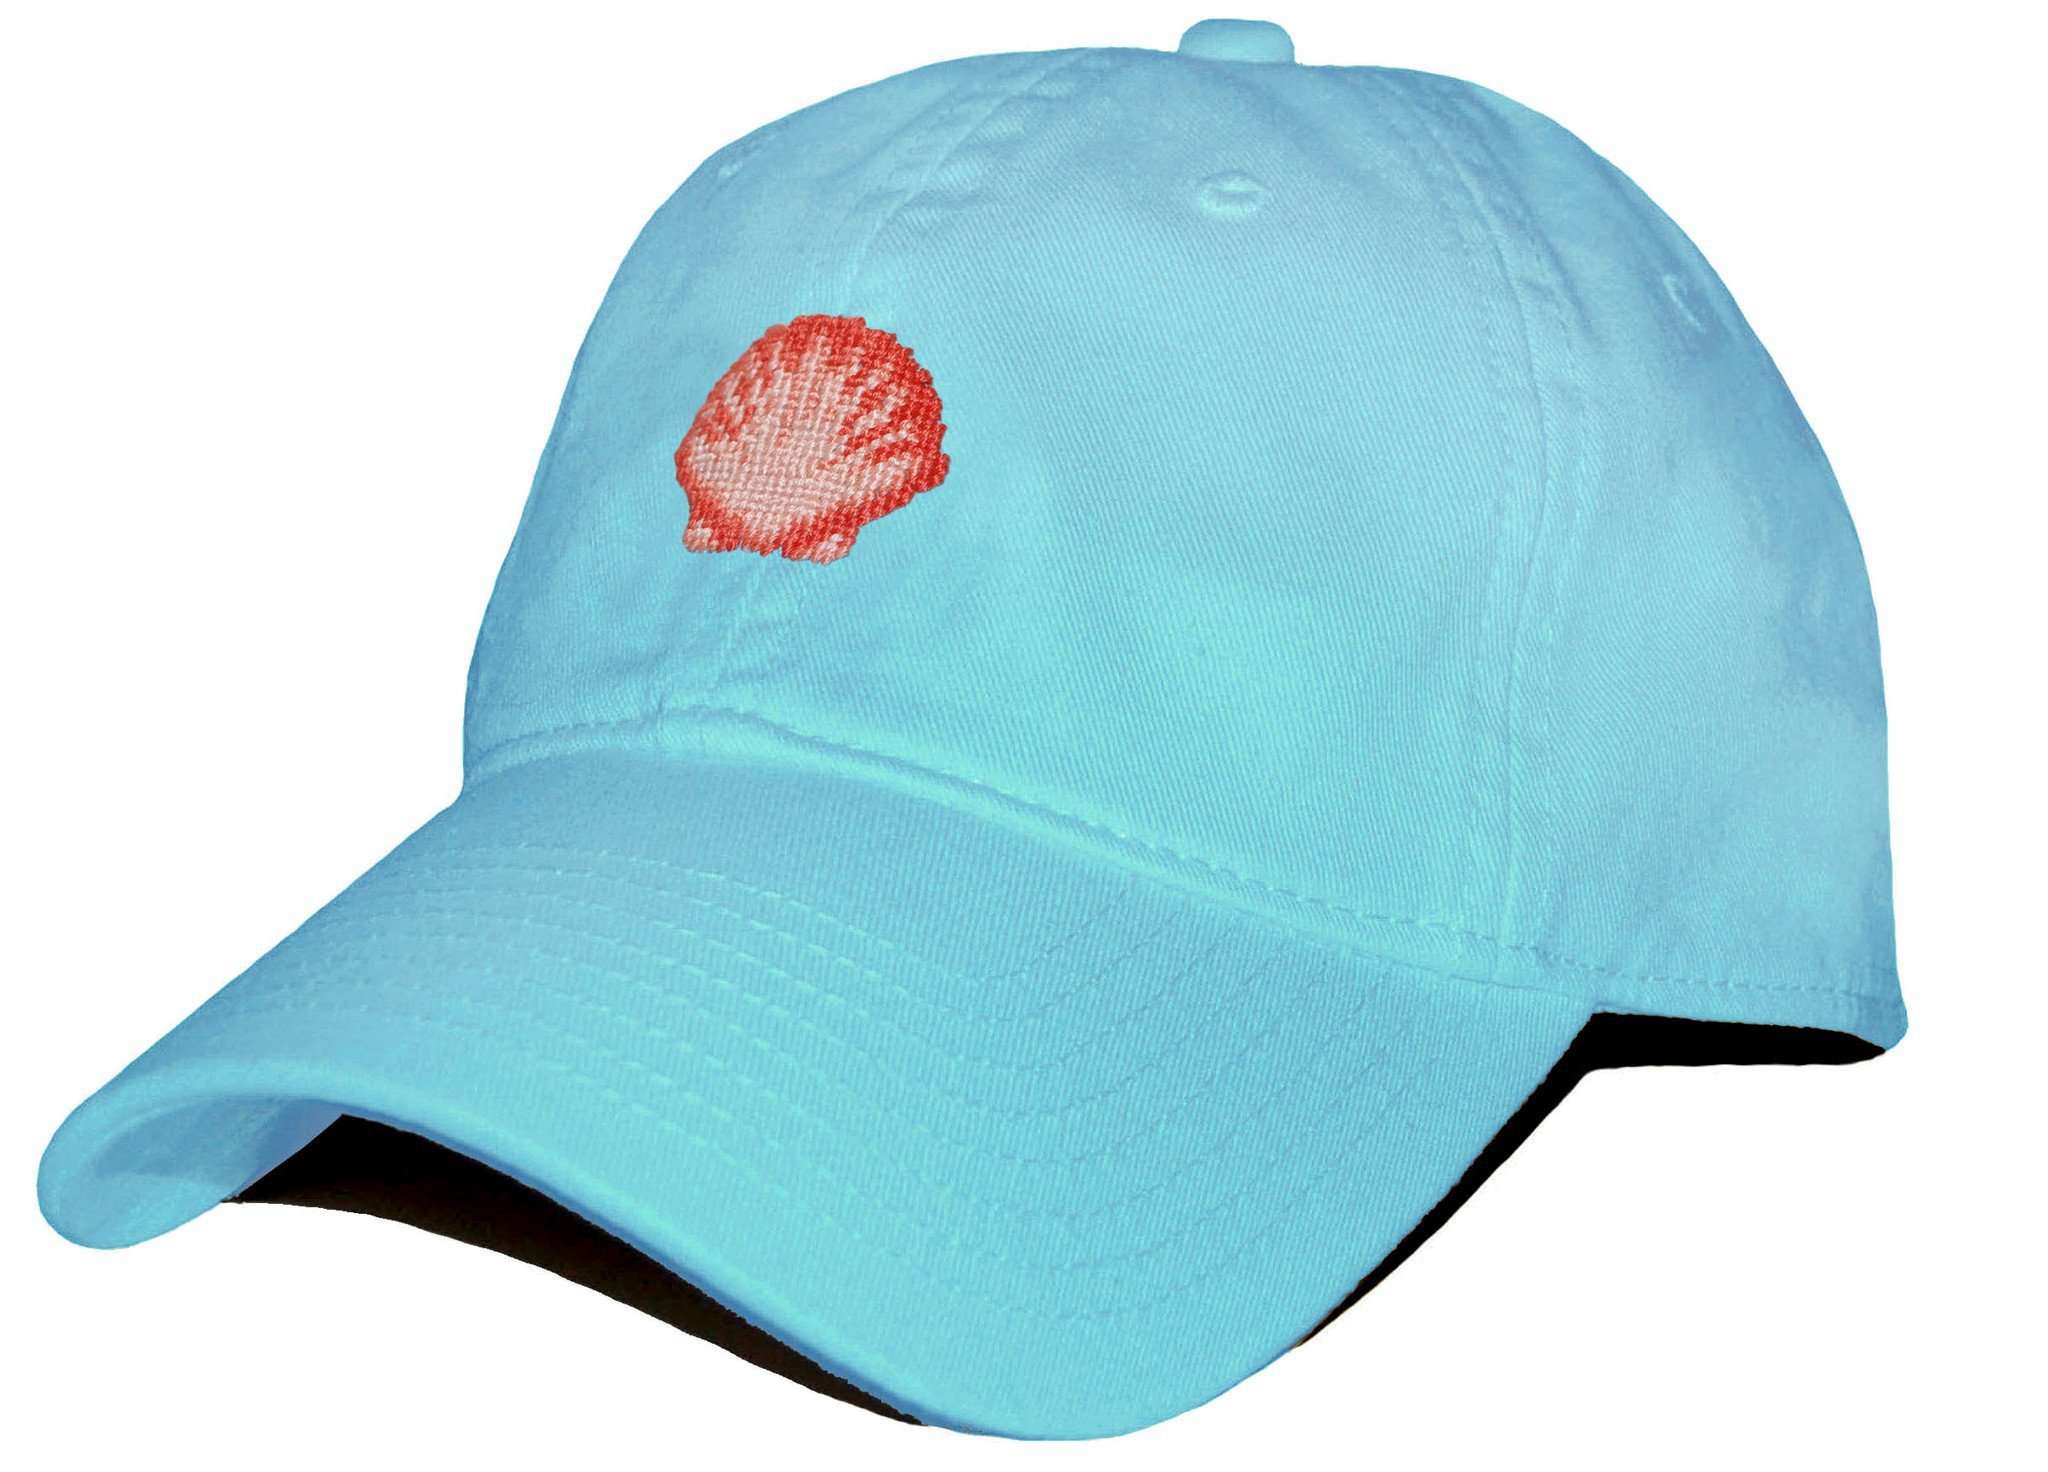 Scallop Shell Needlepoint Hat in Glacier Blue by Smathers & Branson - Country Club Prep